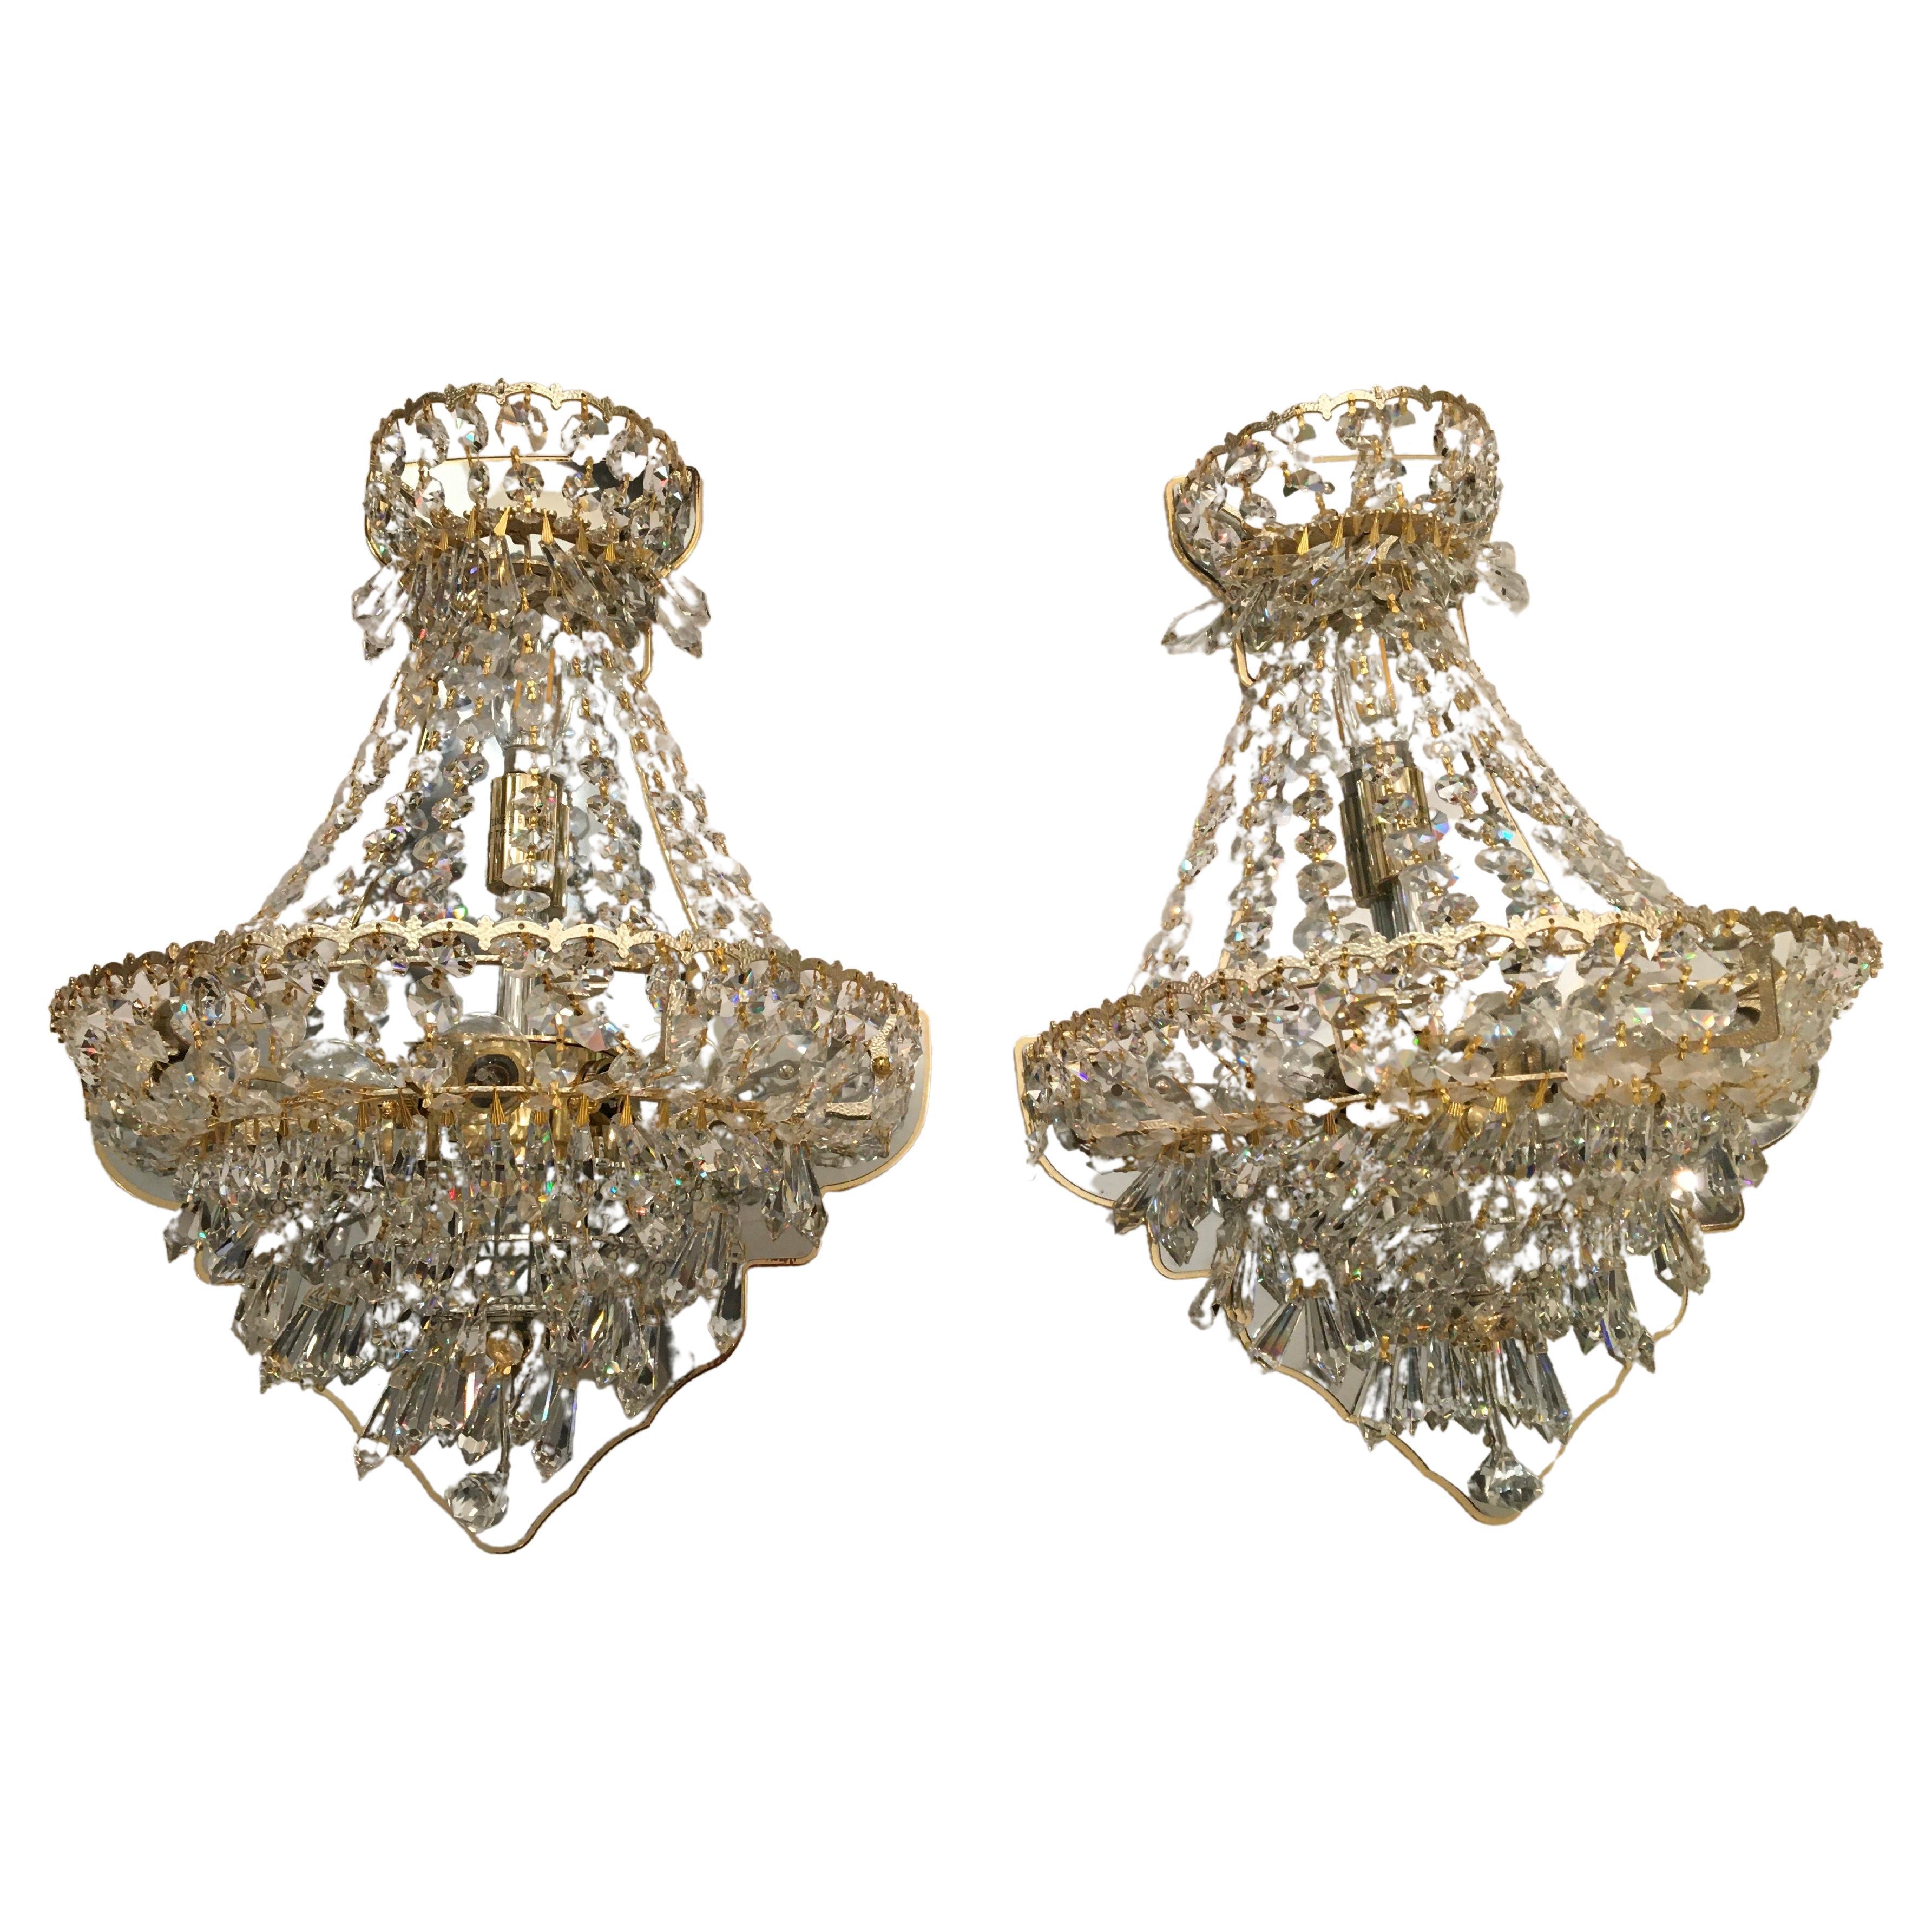 Pair of Schonbek Gold Leaf and Crystal Fancy Wall Sconces